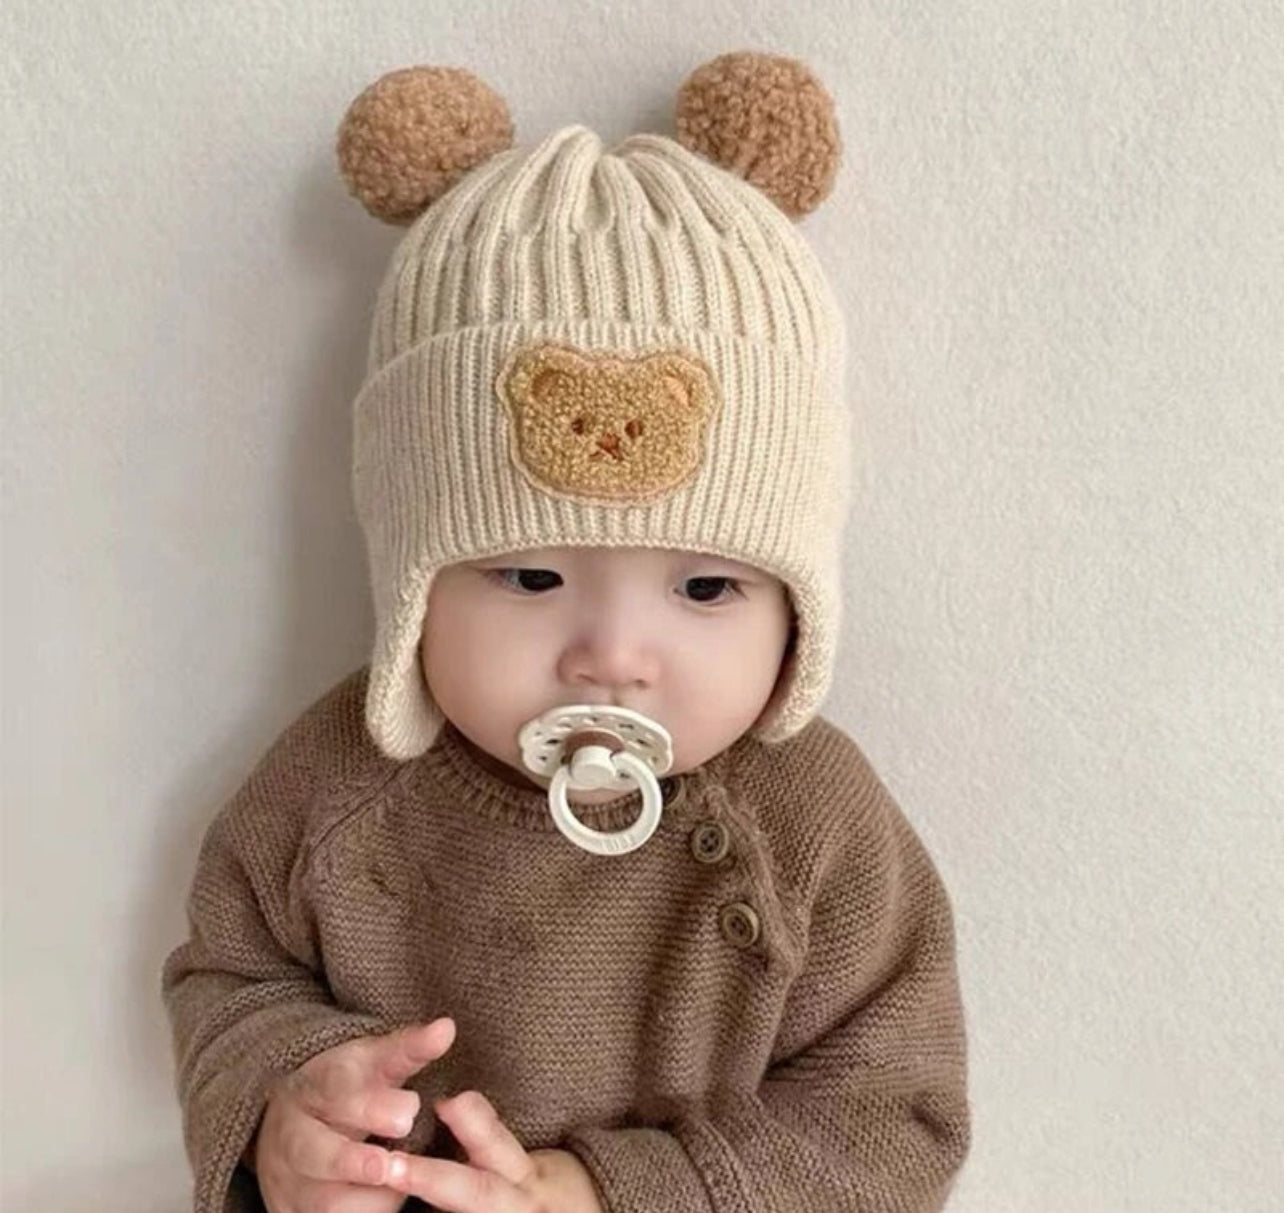 Knitted Baby Cap With Earflaps, Cute Bear Pompom, Ear Protection Bonnet Caps